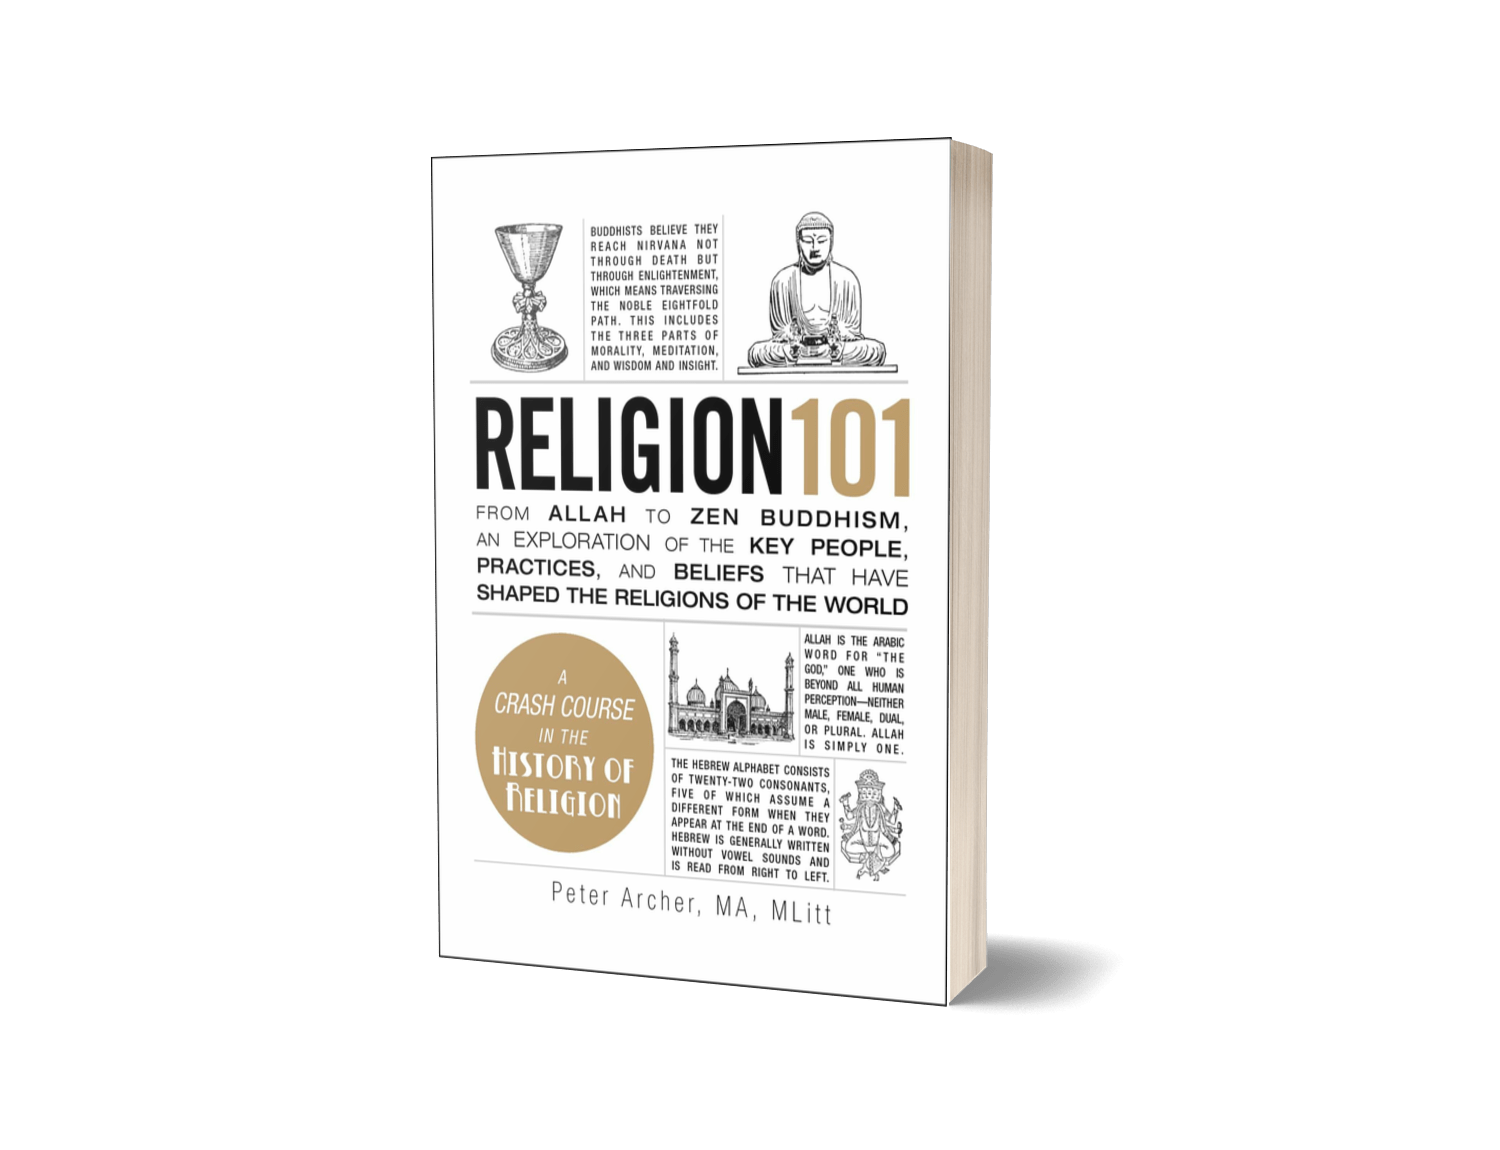 Religion 101 From Allah to Zen Buddhism, an Exploration of the Key People, Practices, and Beliefs that Have Shaped the Religions of the World